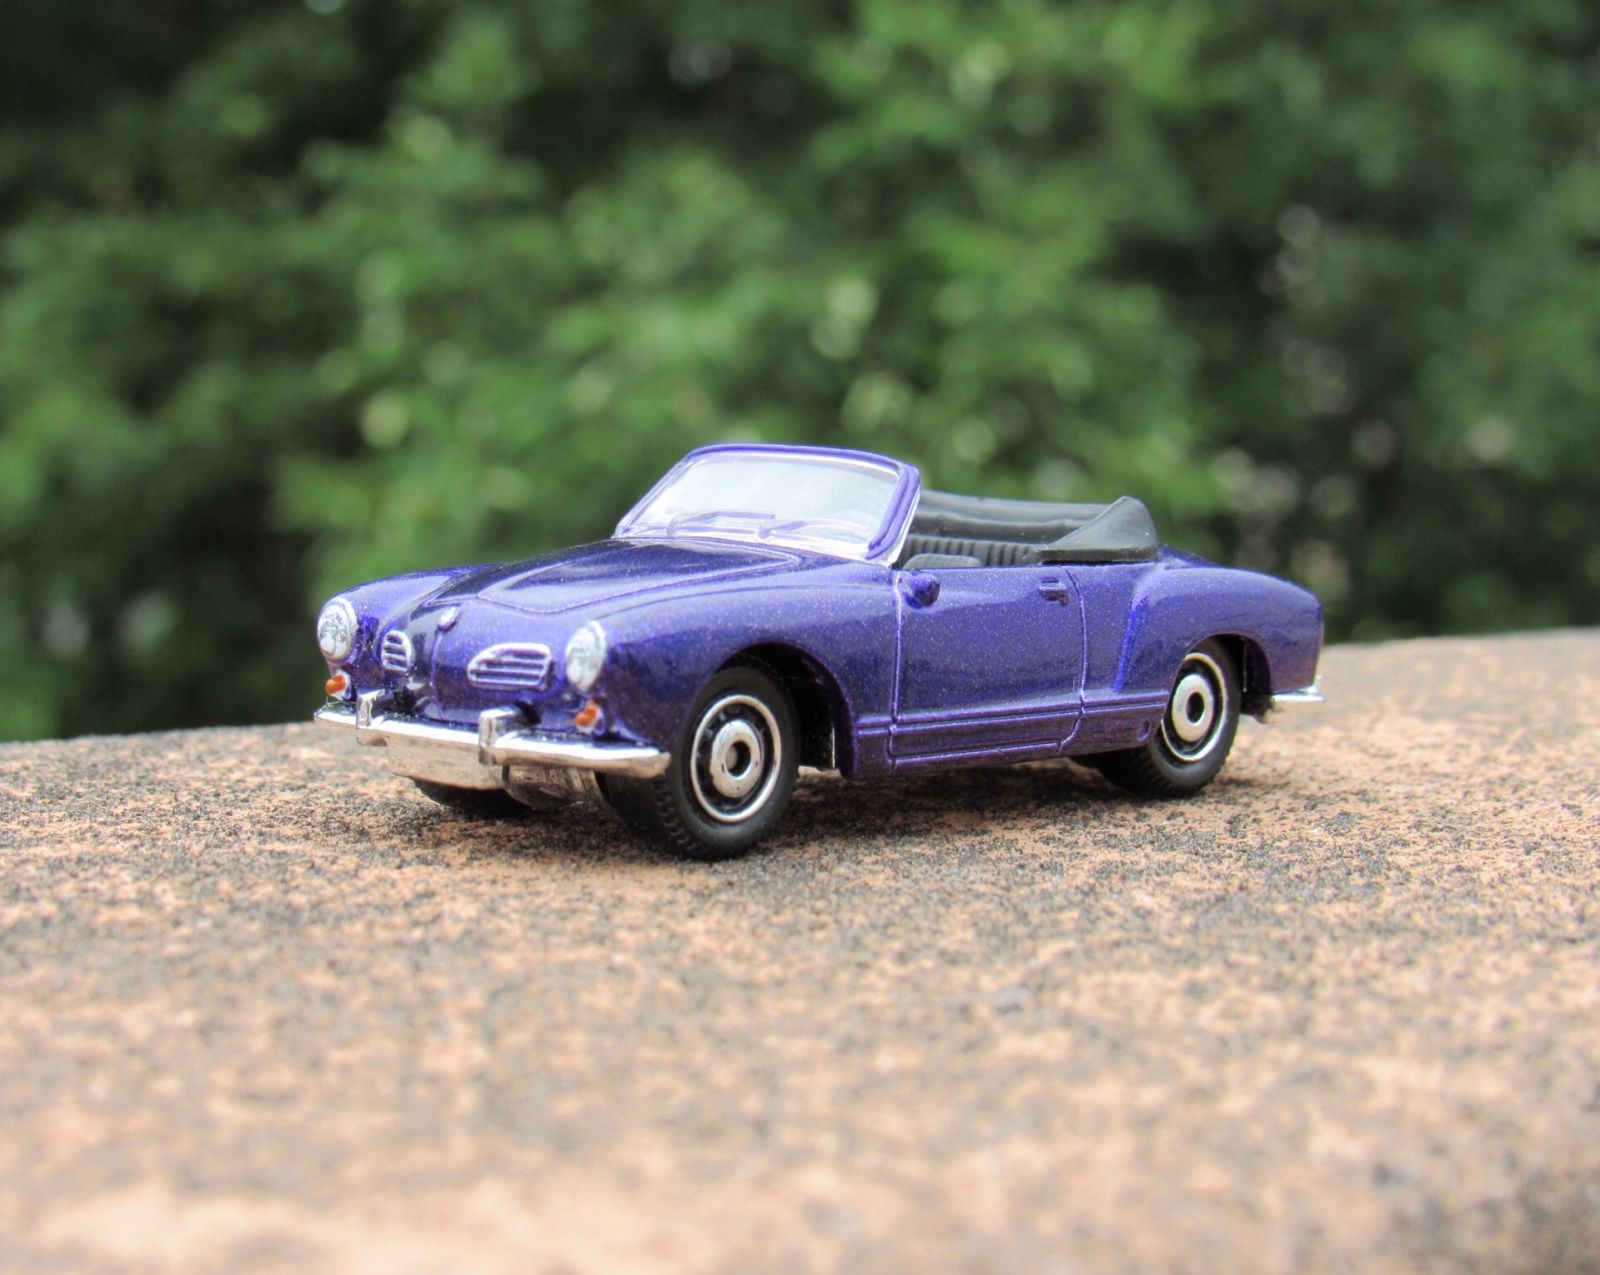 Illustration for article titled Teutonic Tuesday: Matchbox VW Karmann Ghia Convertible